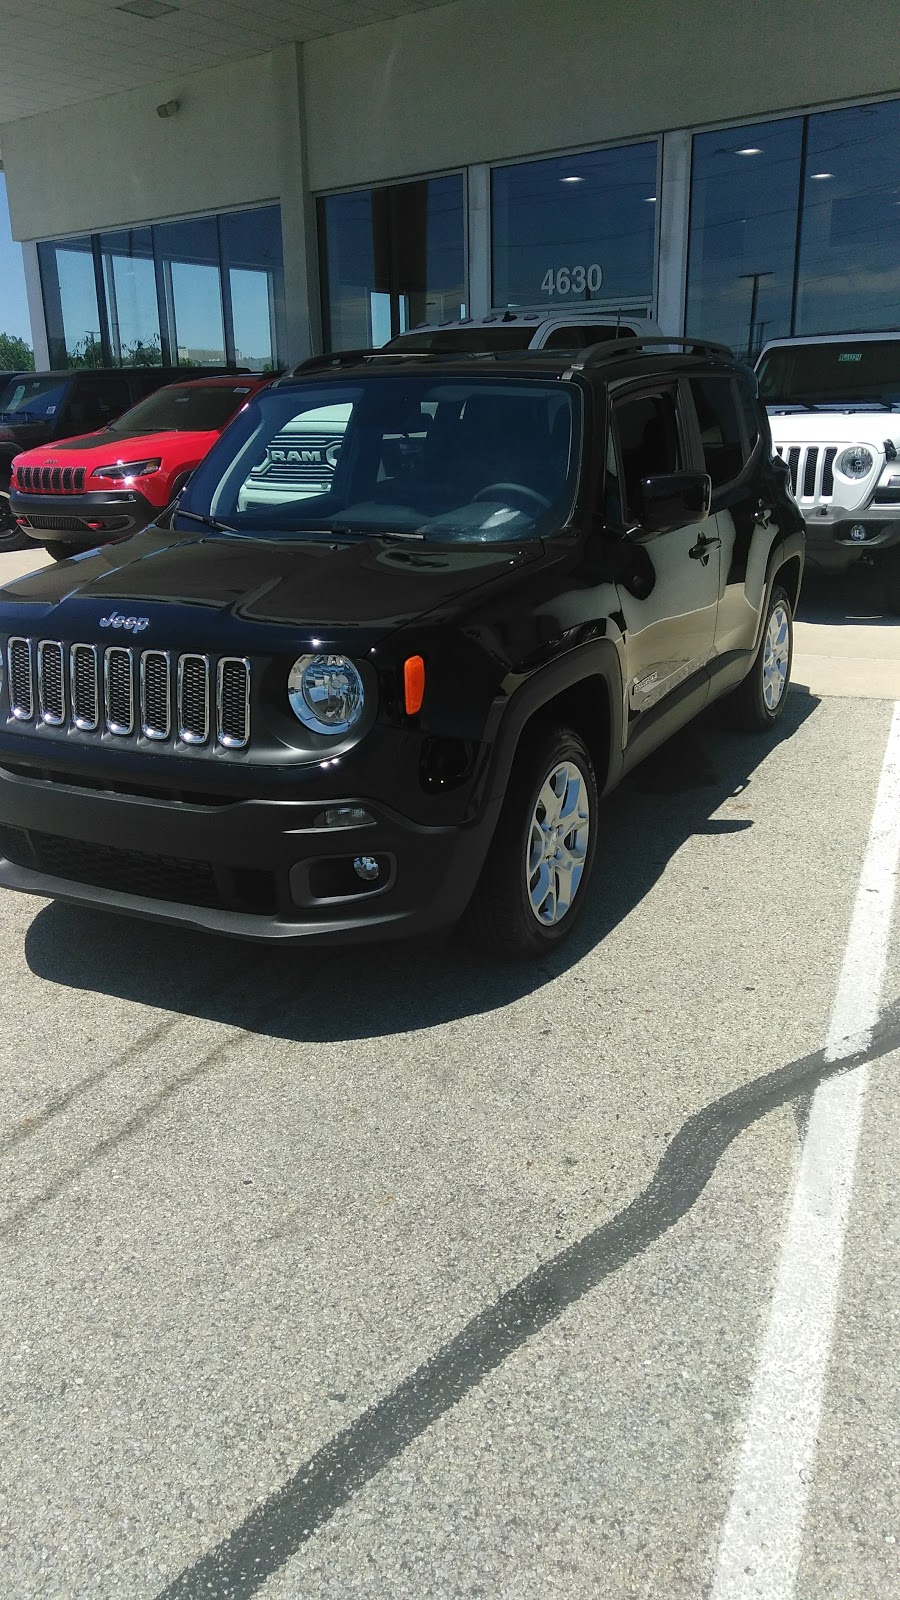 Tom OBrien Chrysler Jeep Dodge Ram - Indianapolis | 4630 E 96th St, Indianapolis, IN 46240, USA | Phone: (463) 223-4099